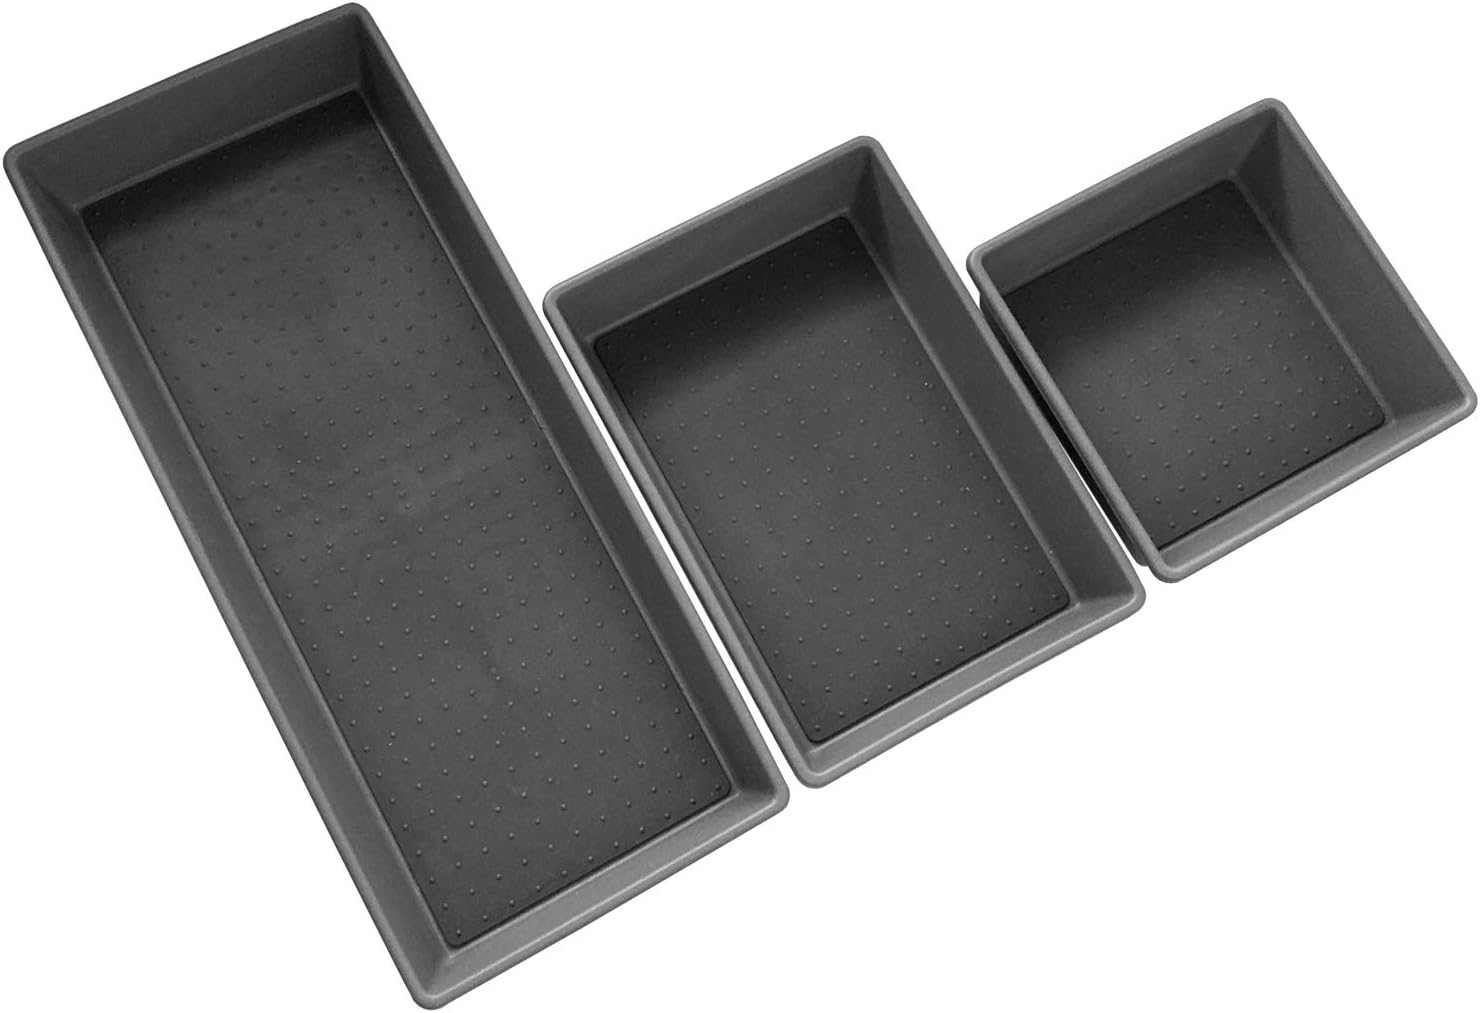 Edge Organization Bins 3 Pack Multi Use Storage for Kitchen Drawers, Office and Bathroom Non-Slip Durable Rubber Lining, Charcoal - Large